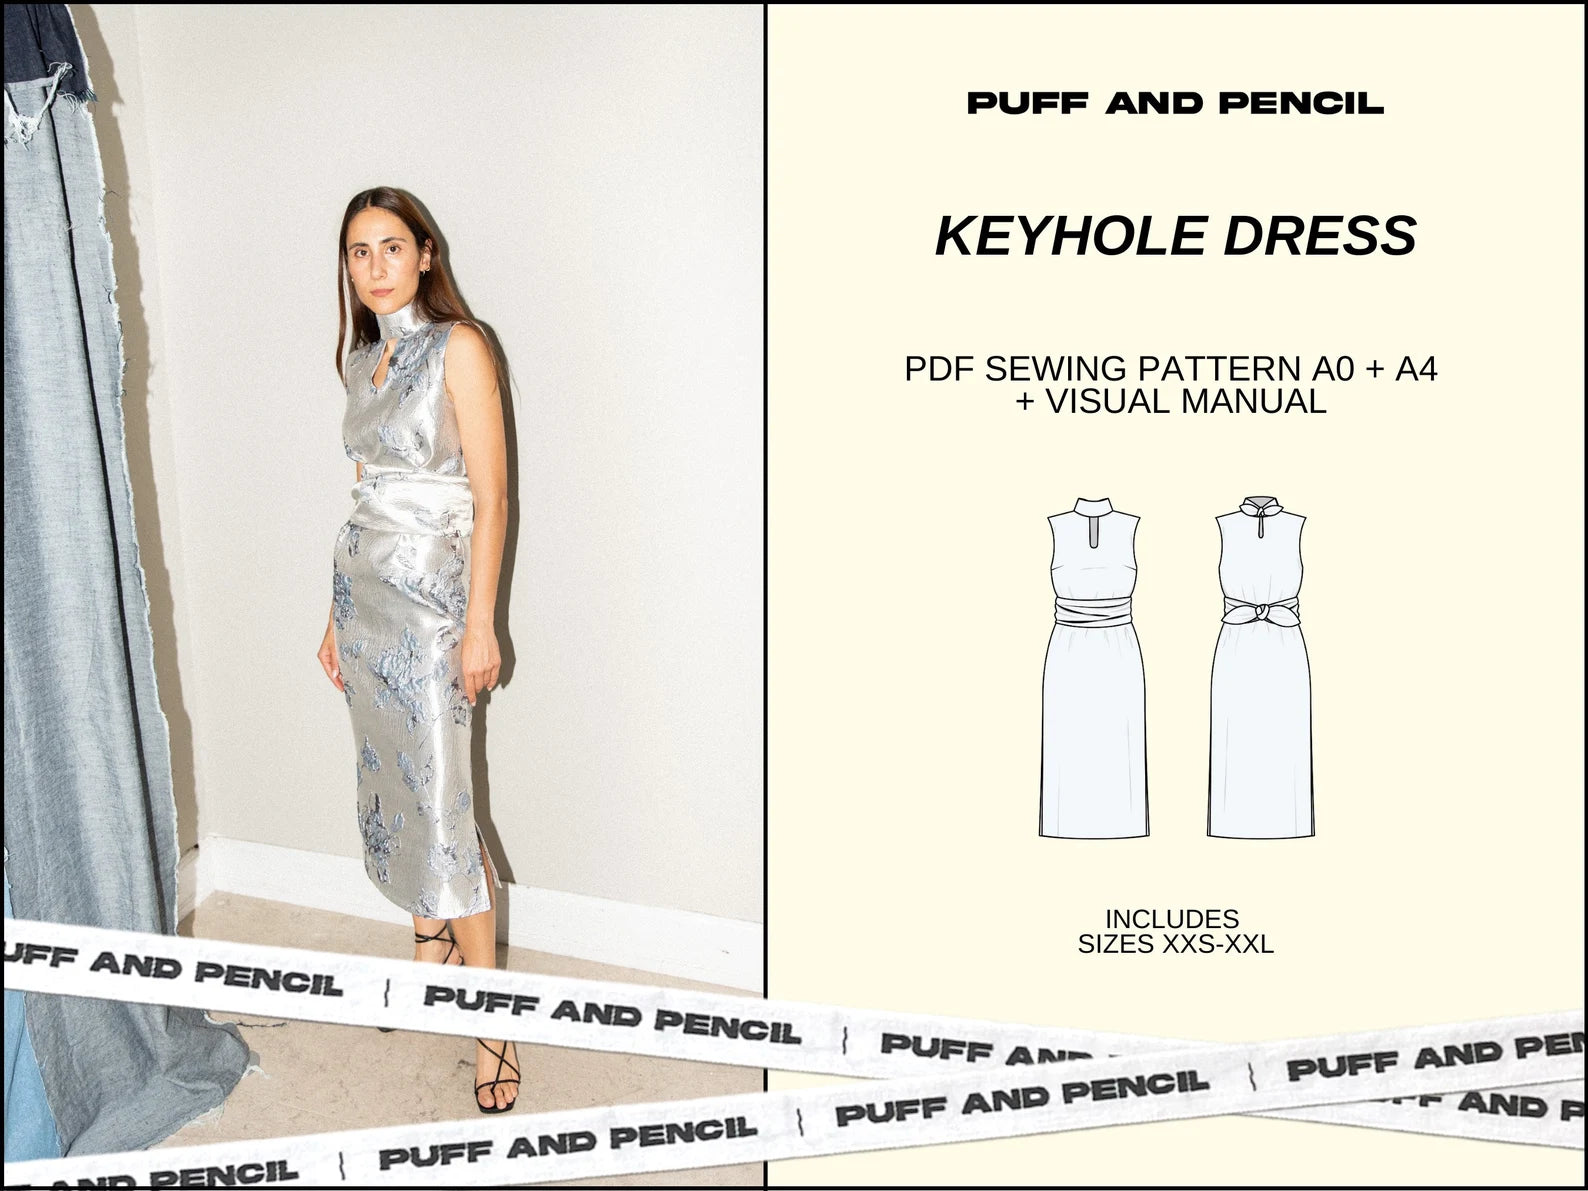 Puff and Pencil Keyhole Dress